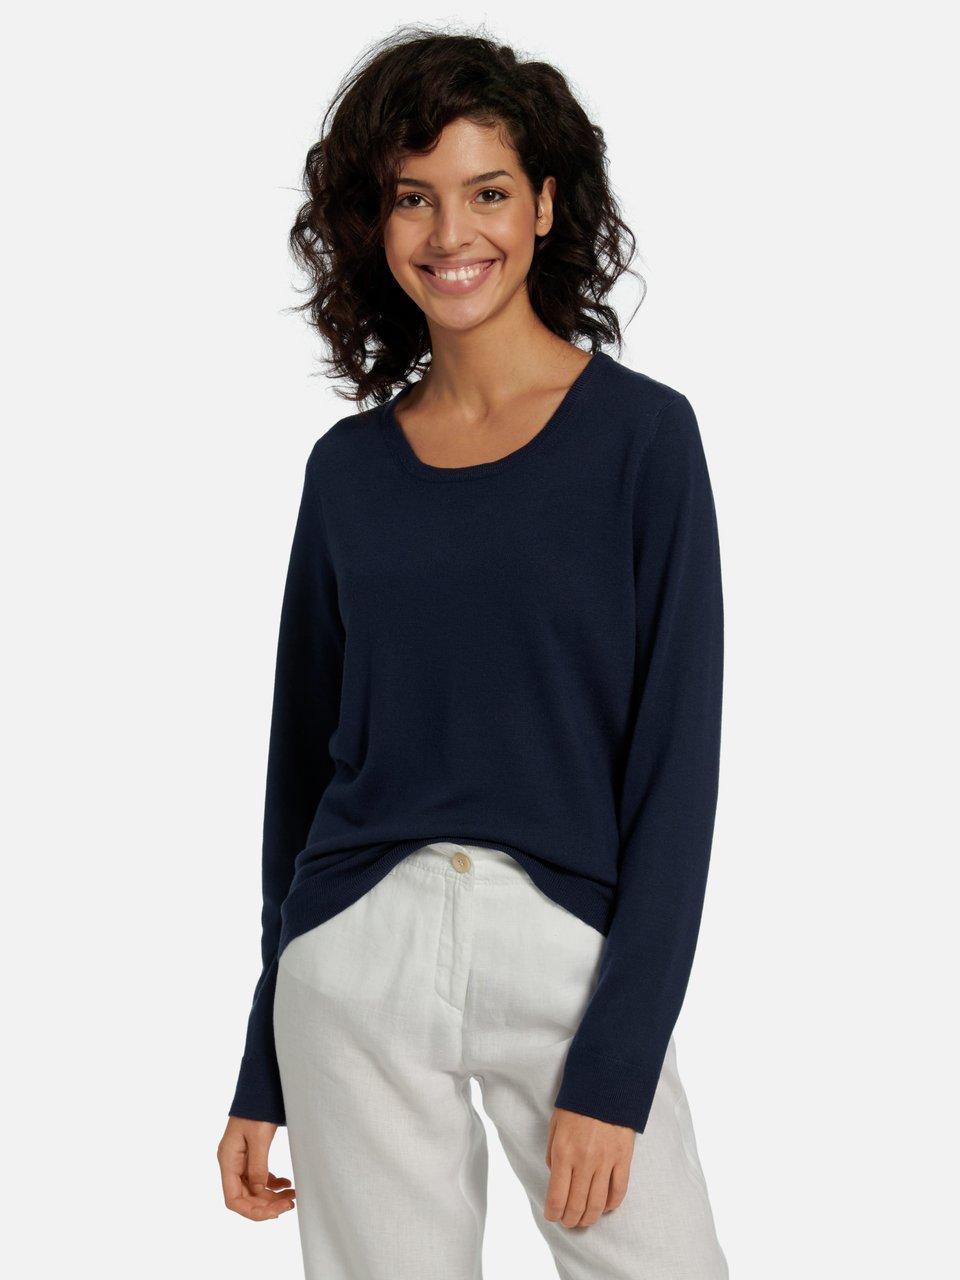 PETER HAHN PURE EDITION - Le pull 100% laine vierge